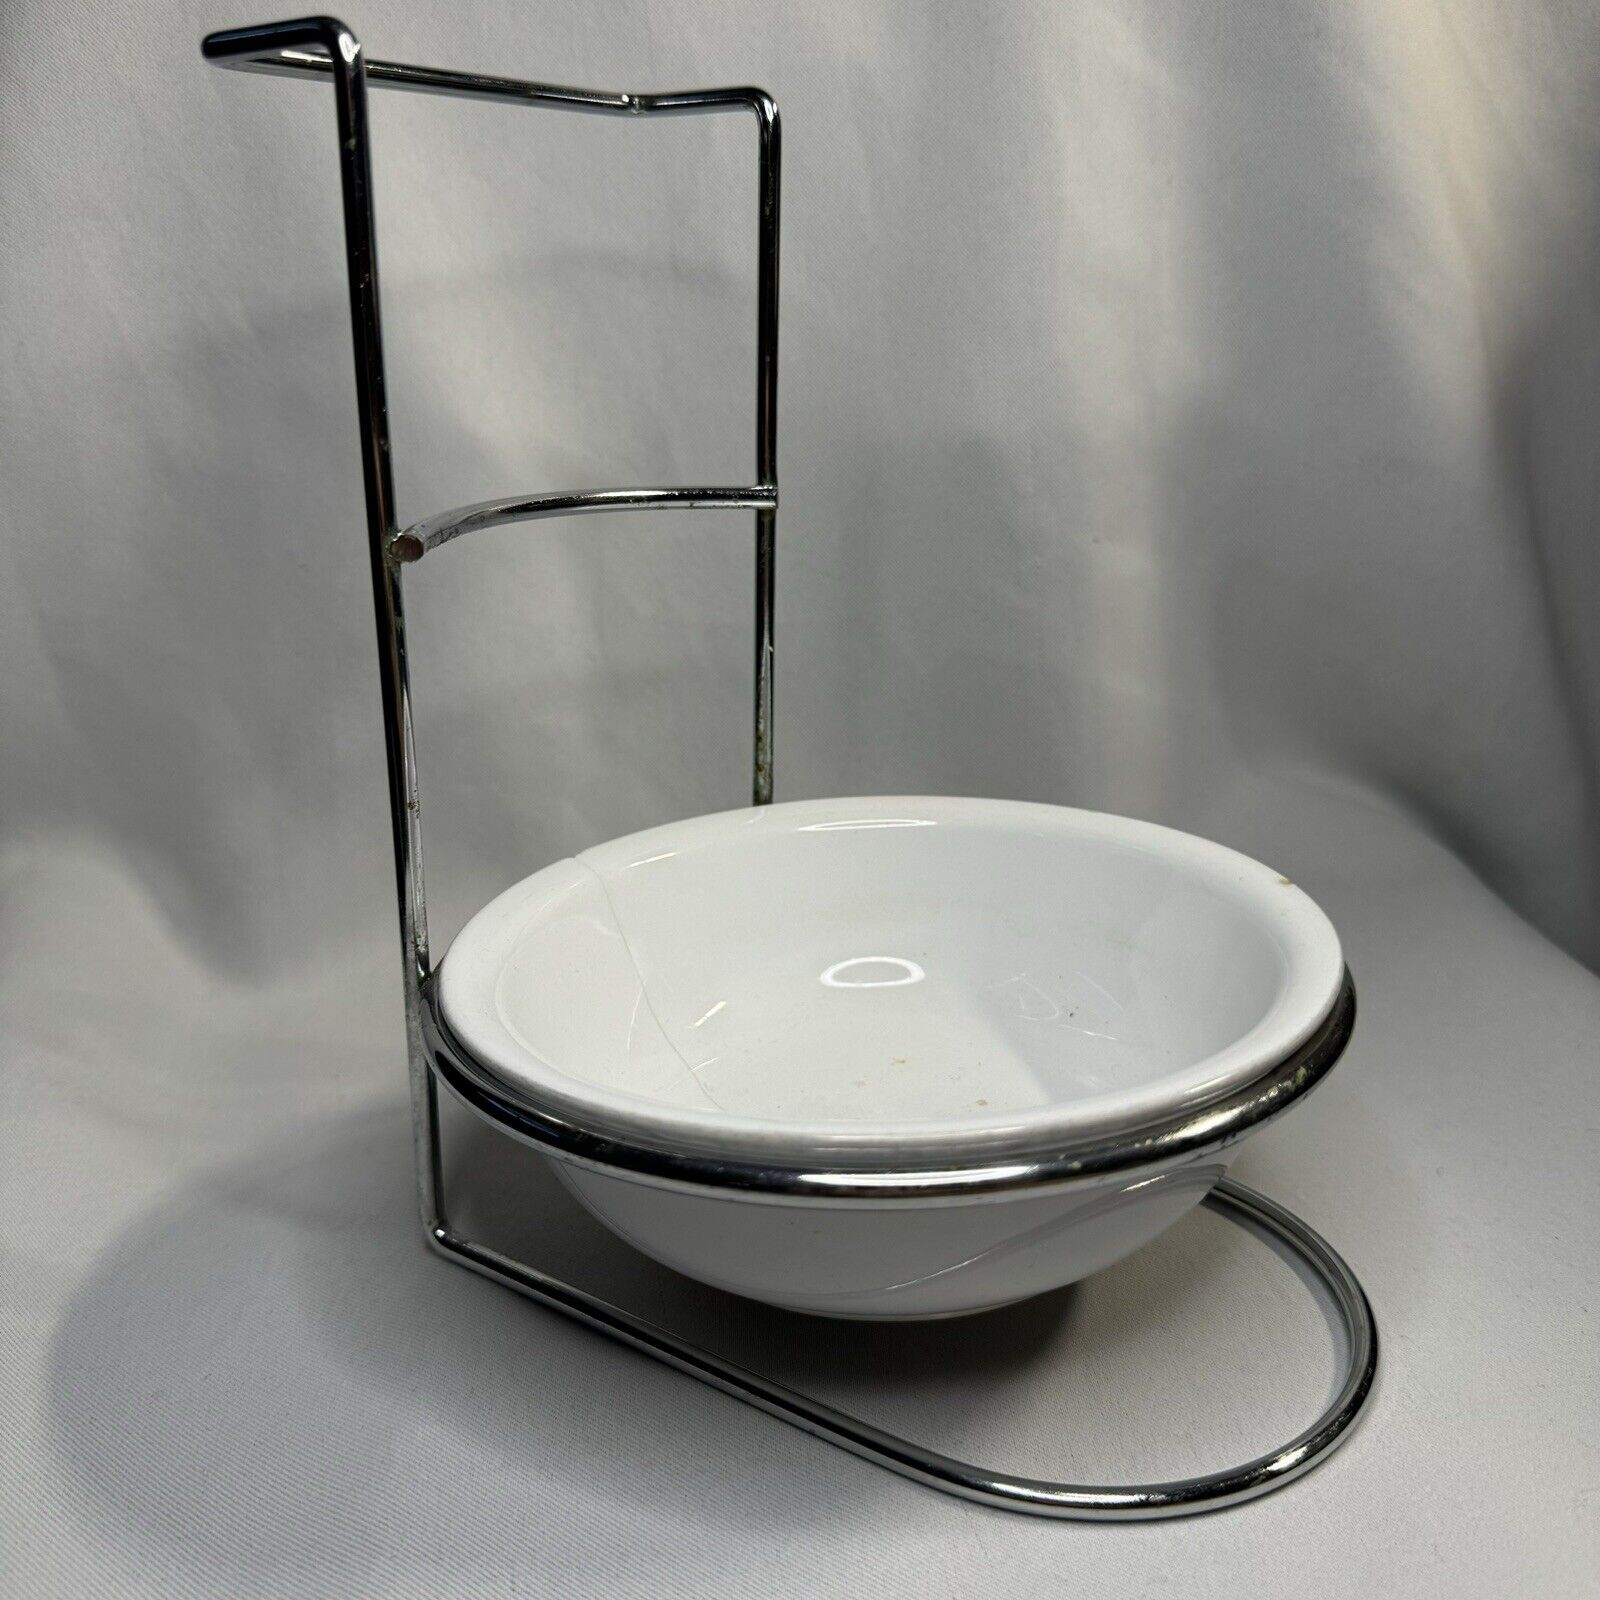 Vintage Upright Chrome Spoon Rest Holder for Stove Top With Ceramic Bowl